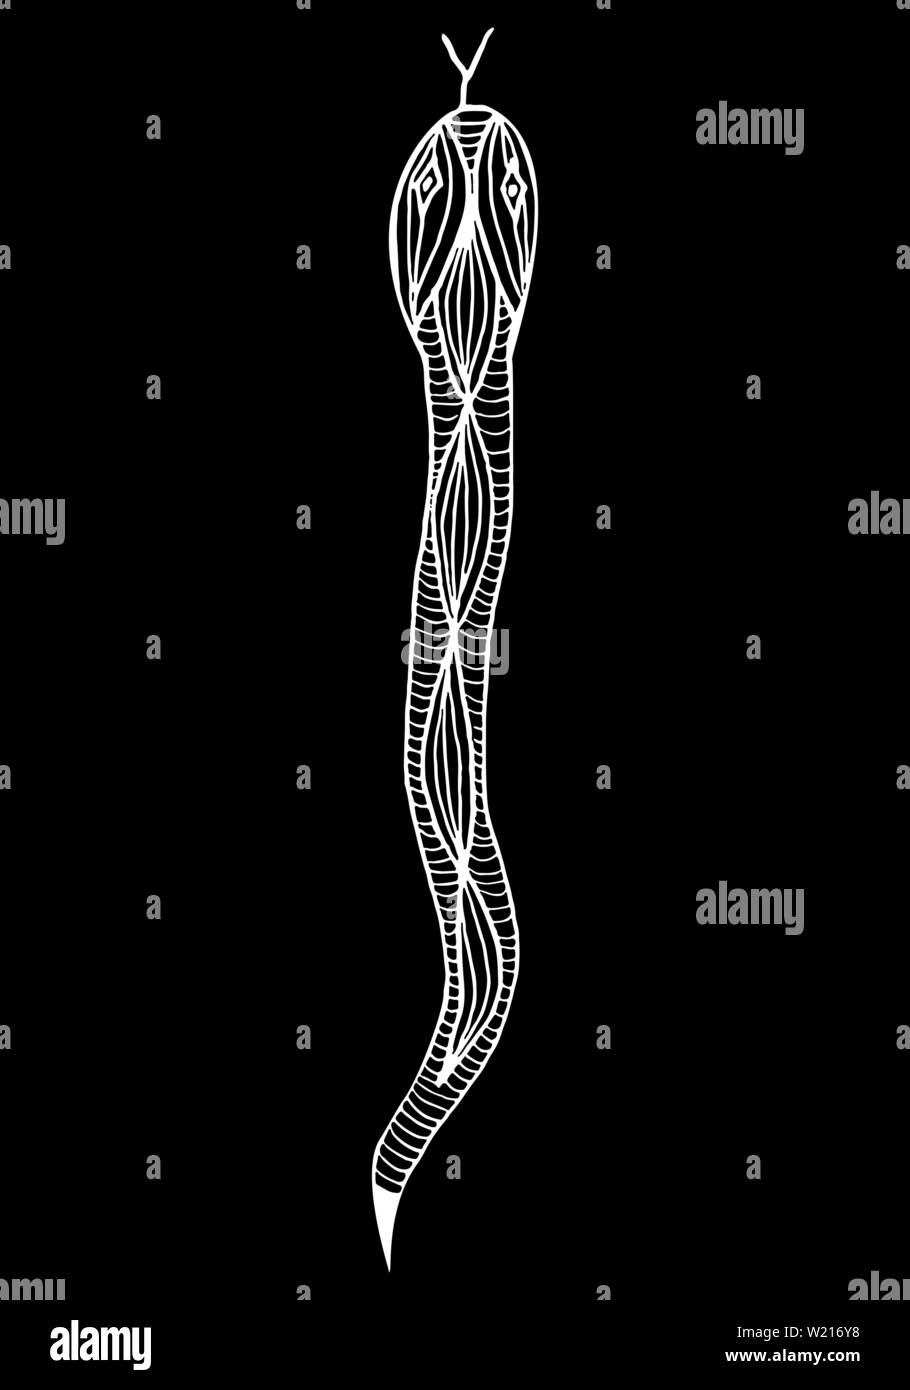 Hand drawn illustrations of viper snake isolated on black background. Stock Vector